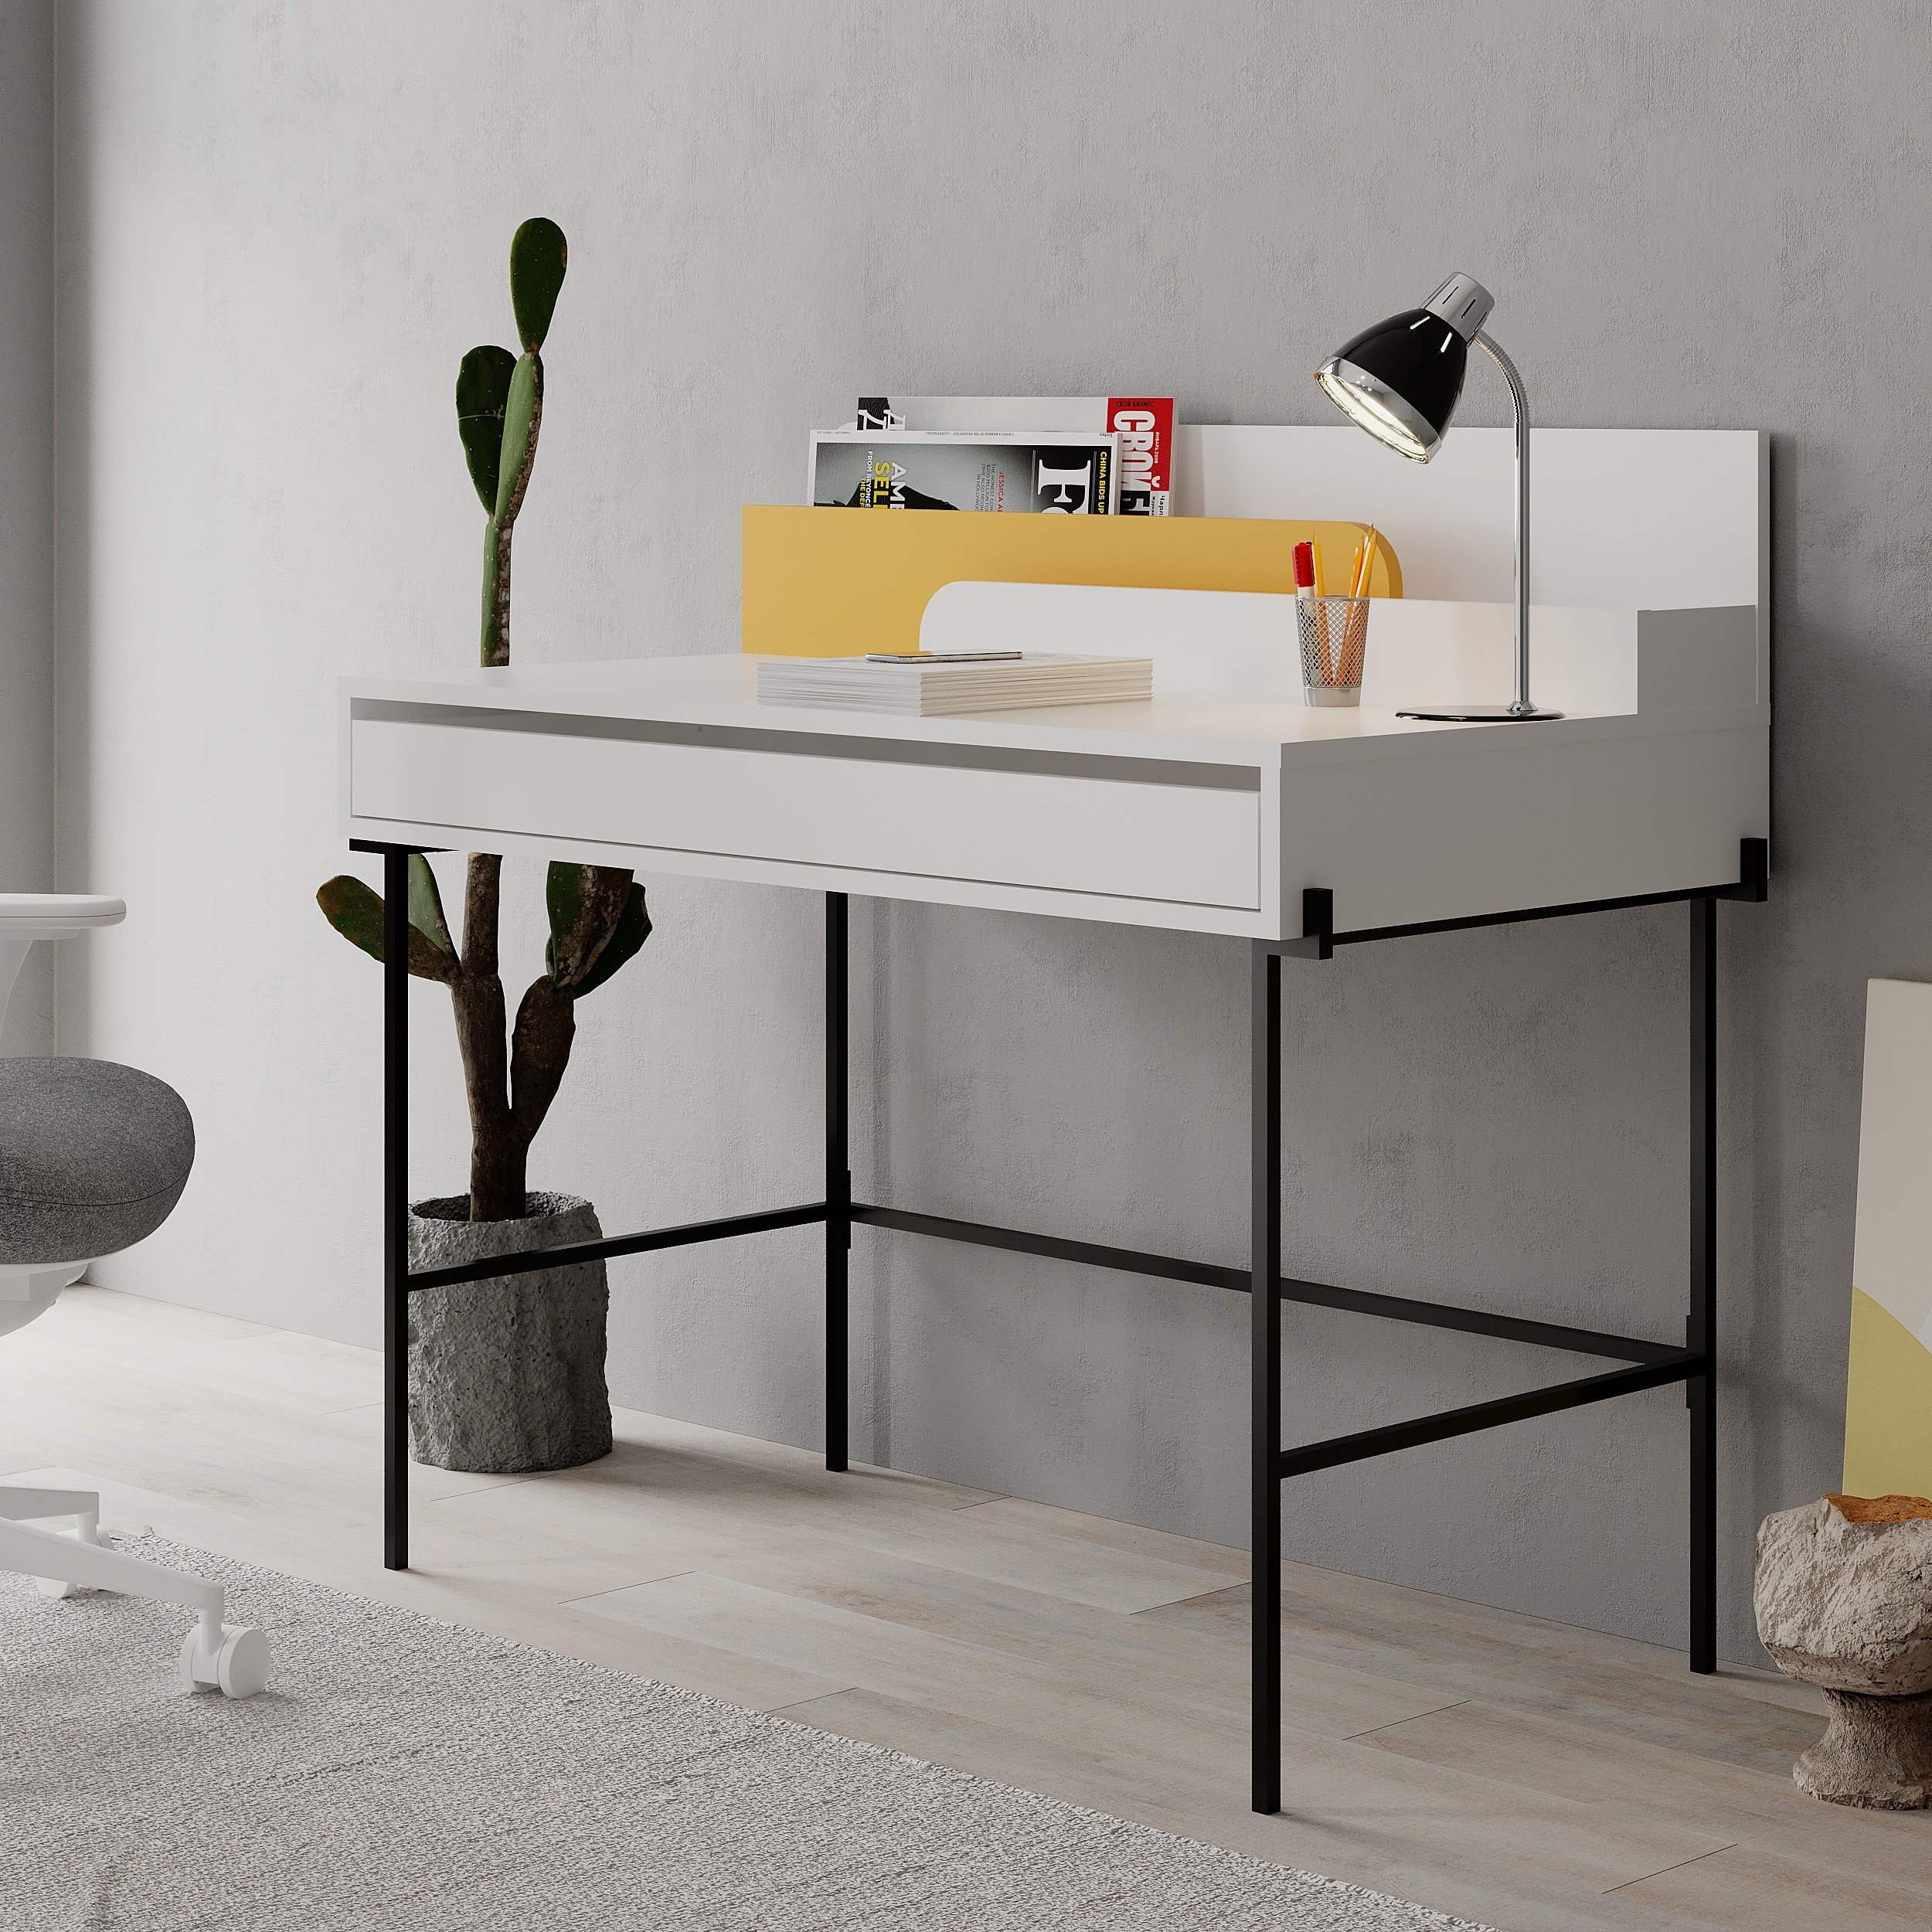 LEILA WORKING TABLE - WHITE - MUSTARD M.MS.23313.2